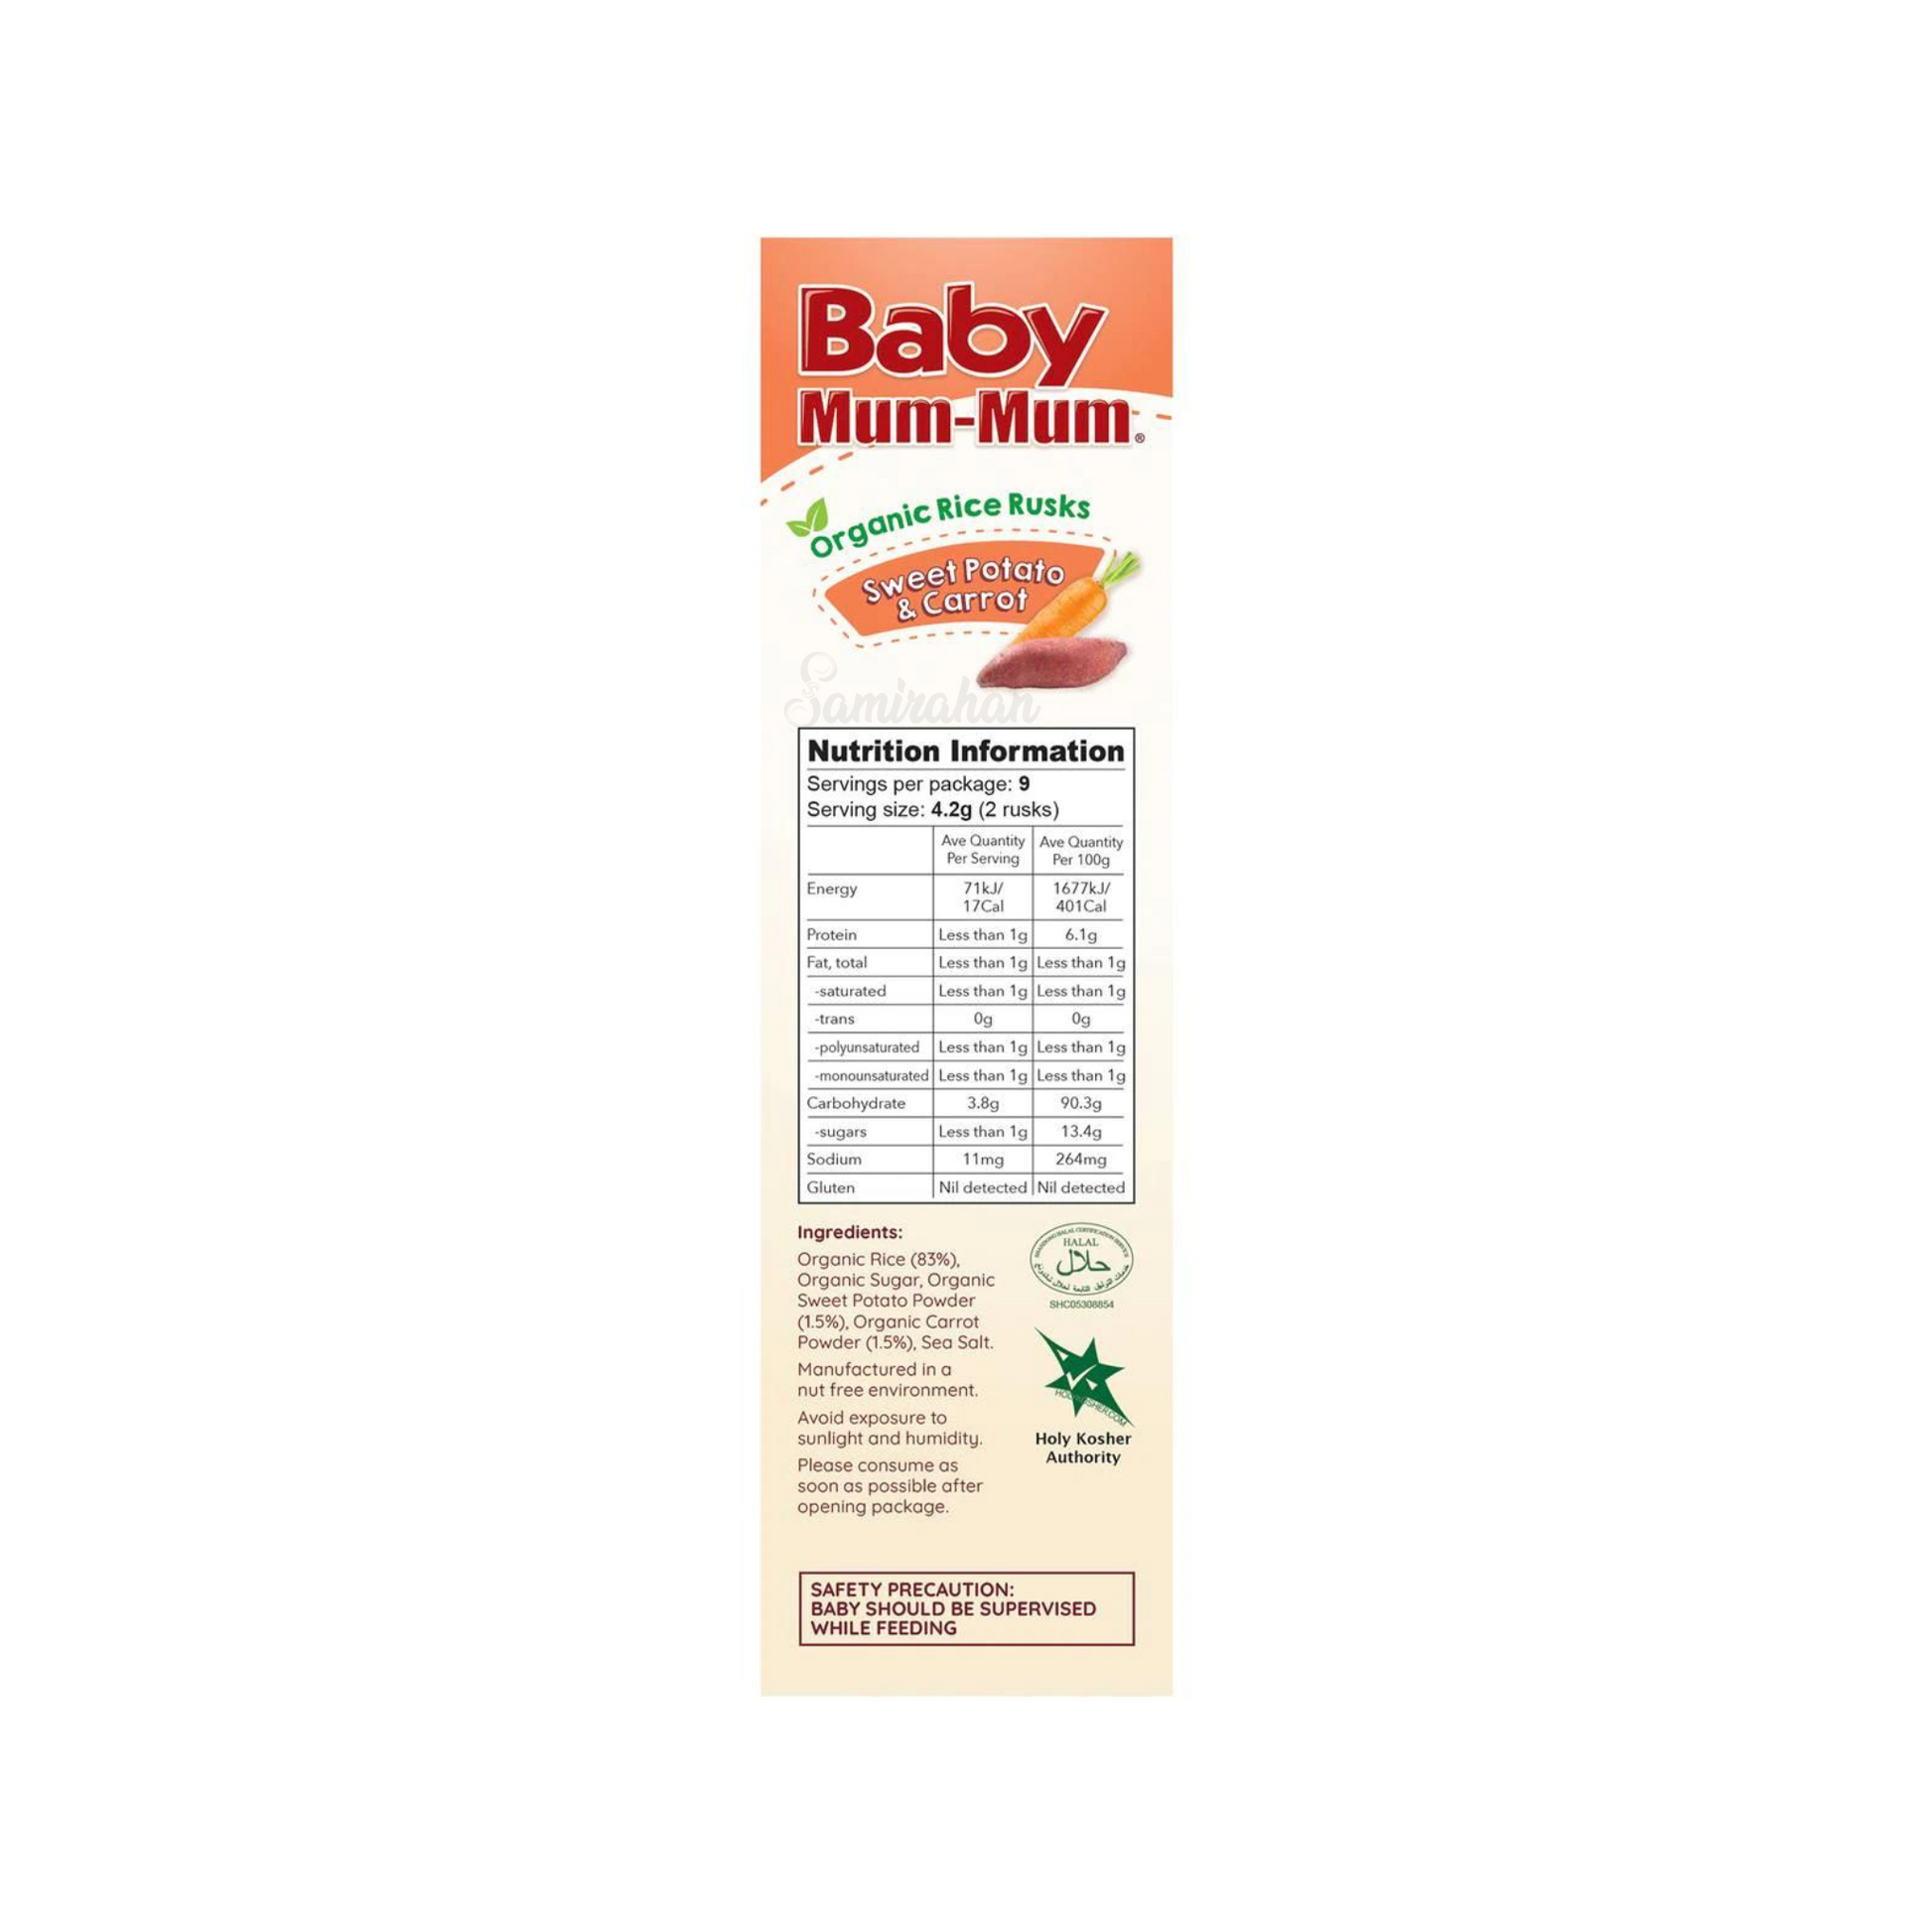 Baby Mum Mum Organic Rice Rusk Sweet Potato & Carrot 8+ Months are made from premium Australian grain, fruits & vegetables. No artificial colour or flavor. Halal certified. Best imported foreign Australian Aussie genuine authentic premium quality real child snack healthy price in Dhaka Chittagong Sylhet Bangladesh.